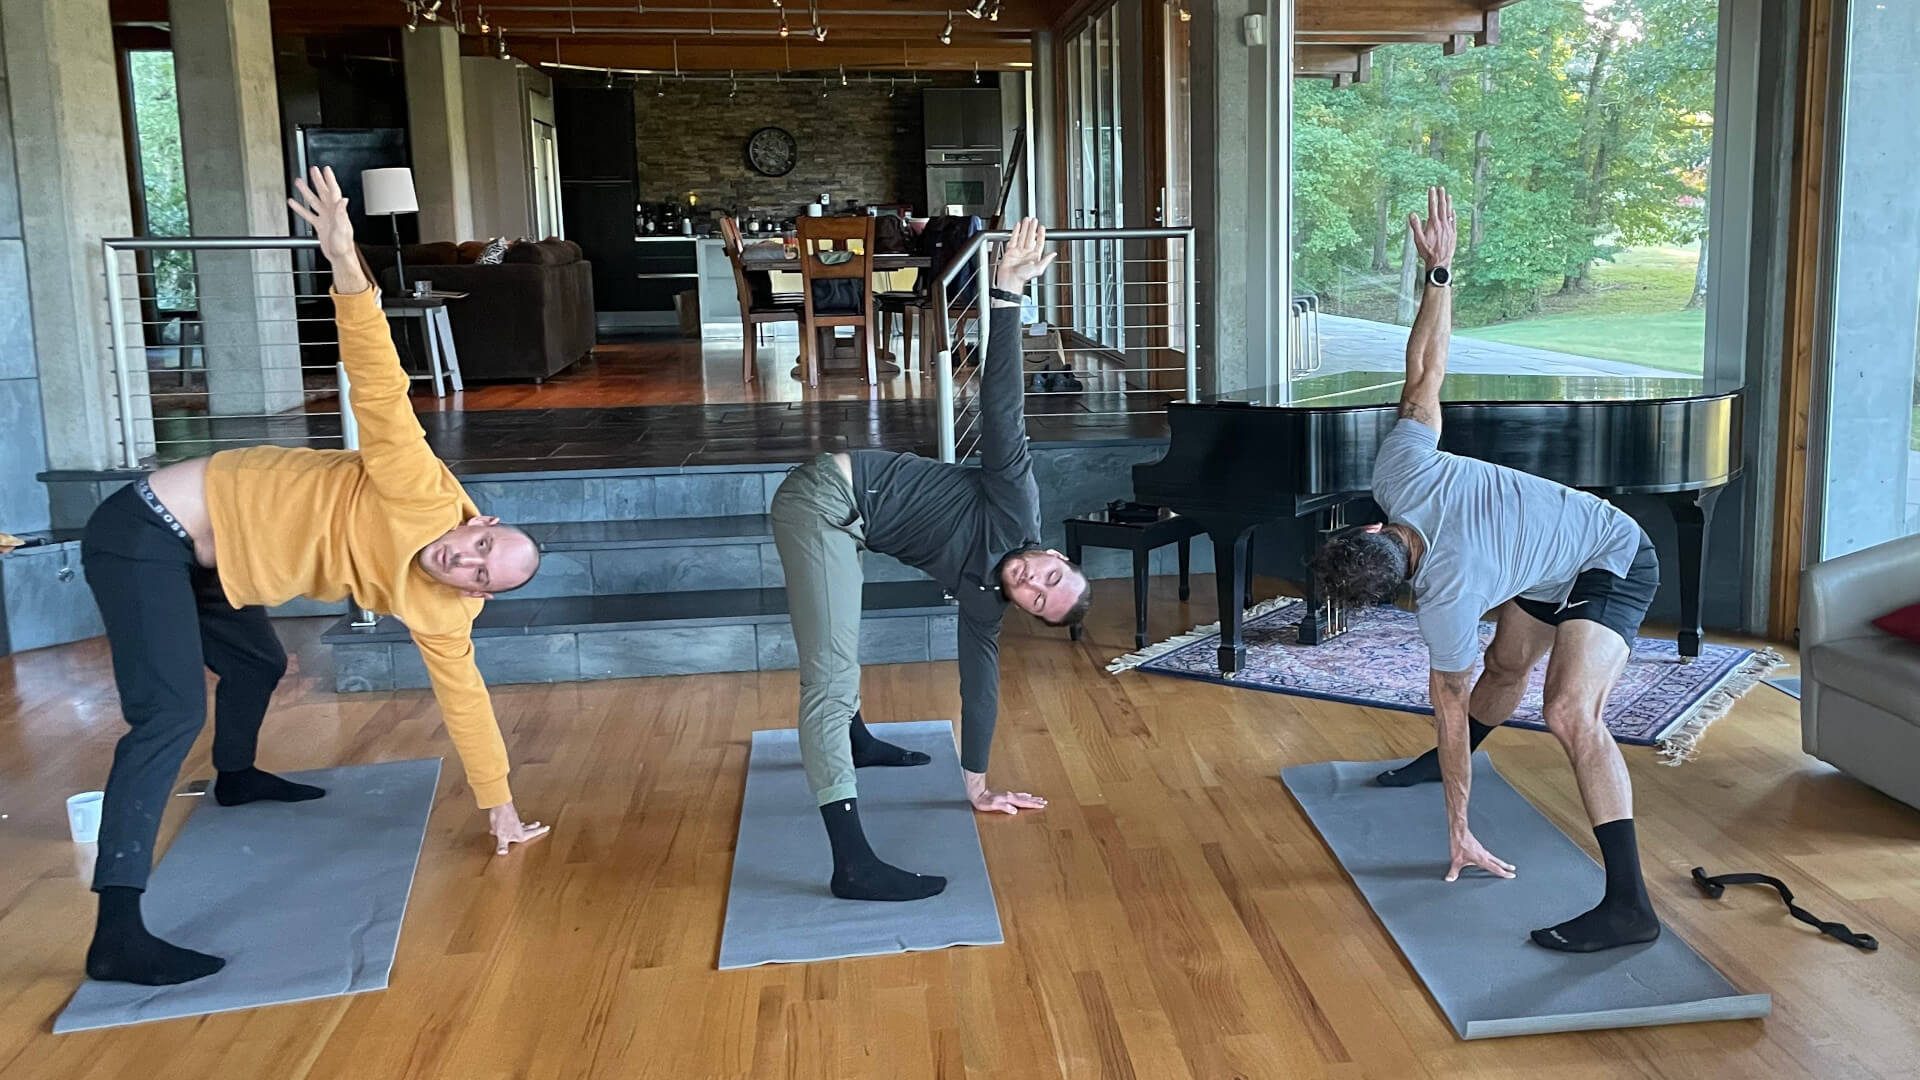 Private yoga session for men in Airbnb living room.